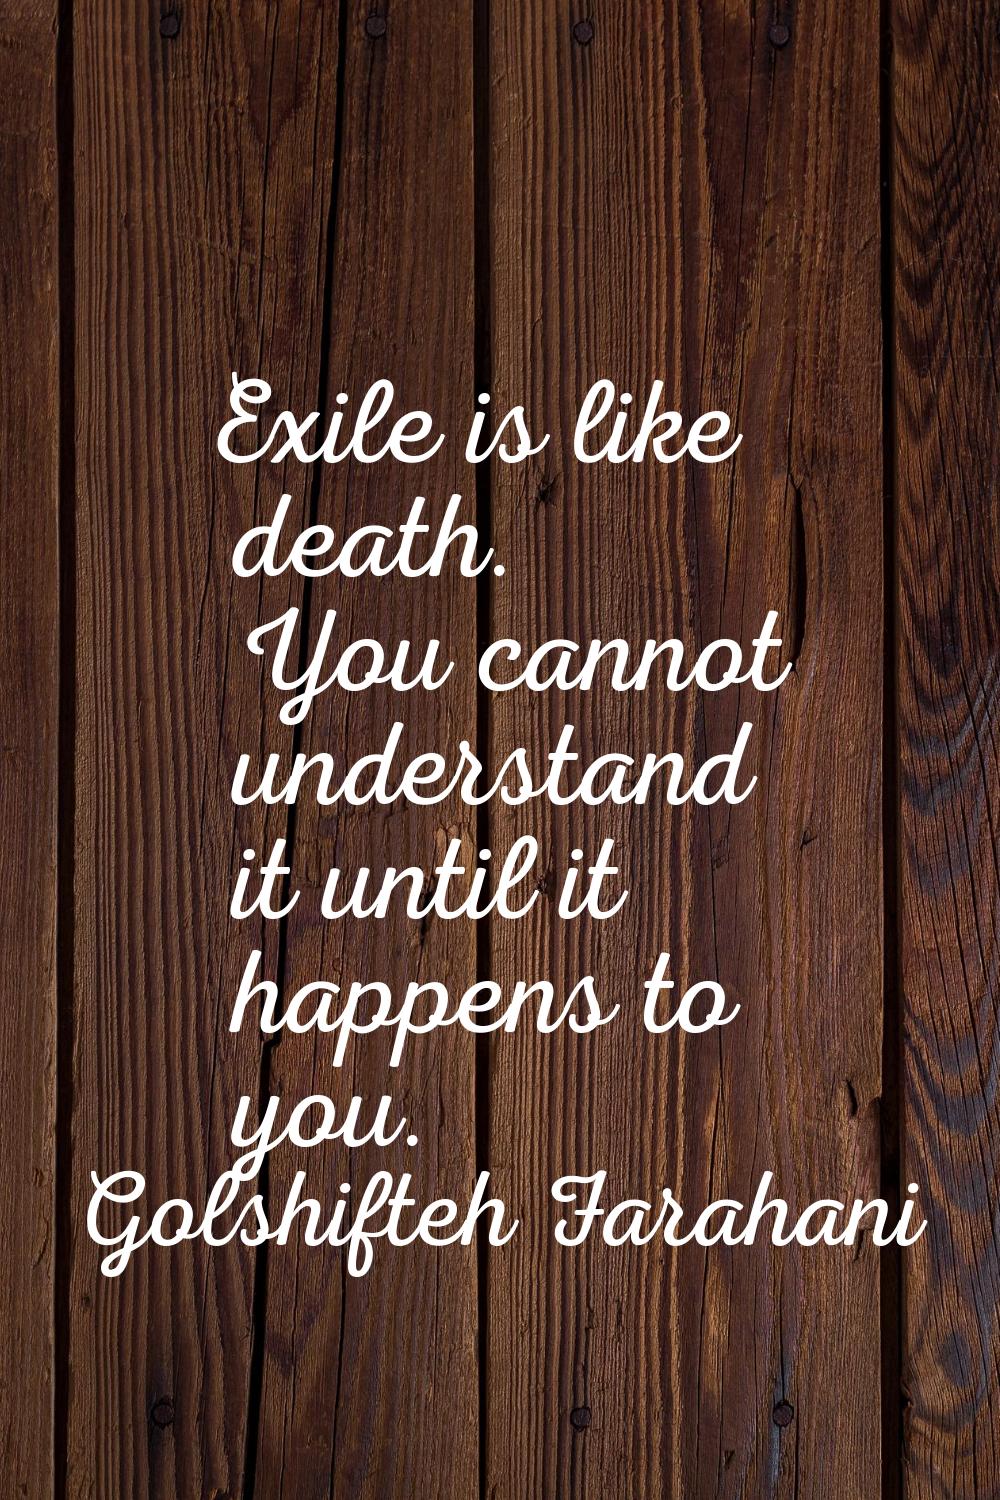 Exile is like death. You cannot understand it until it happens to you.